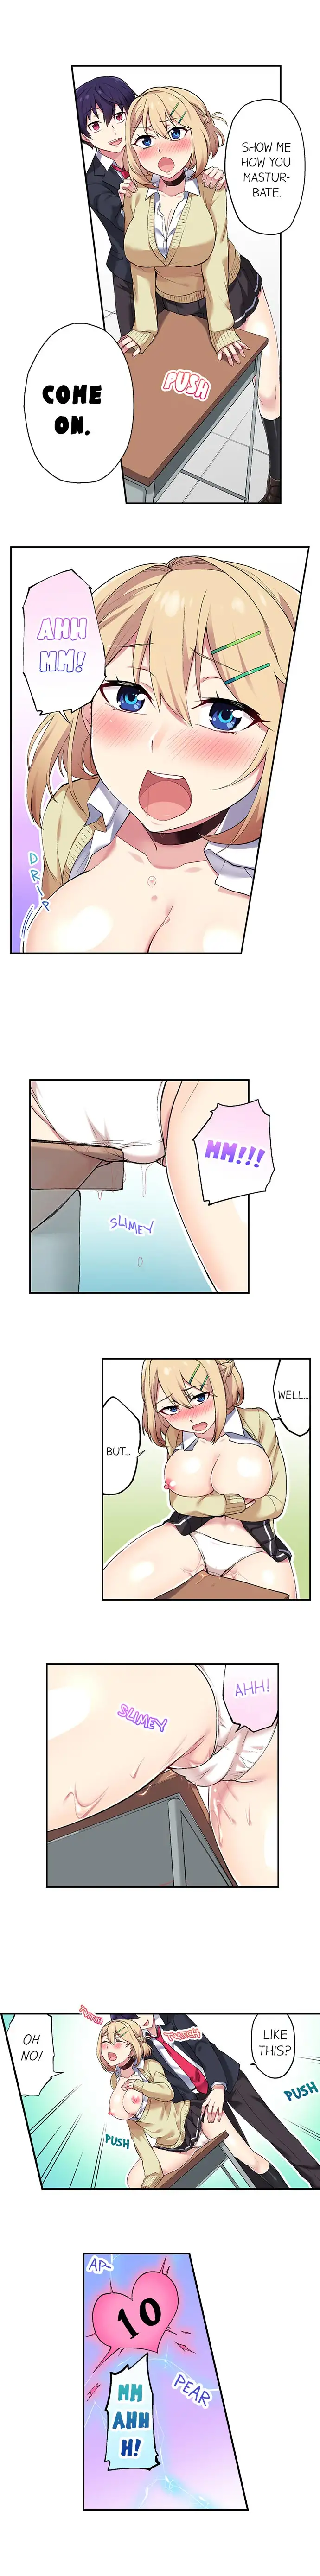 Committee Chairman, Didn’t You Just Masturbate In the Bathroom? I Can See the Number of Times People Orgasm - Chapter 6 Page 8